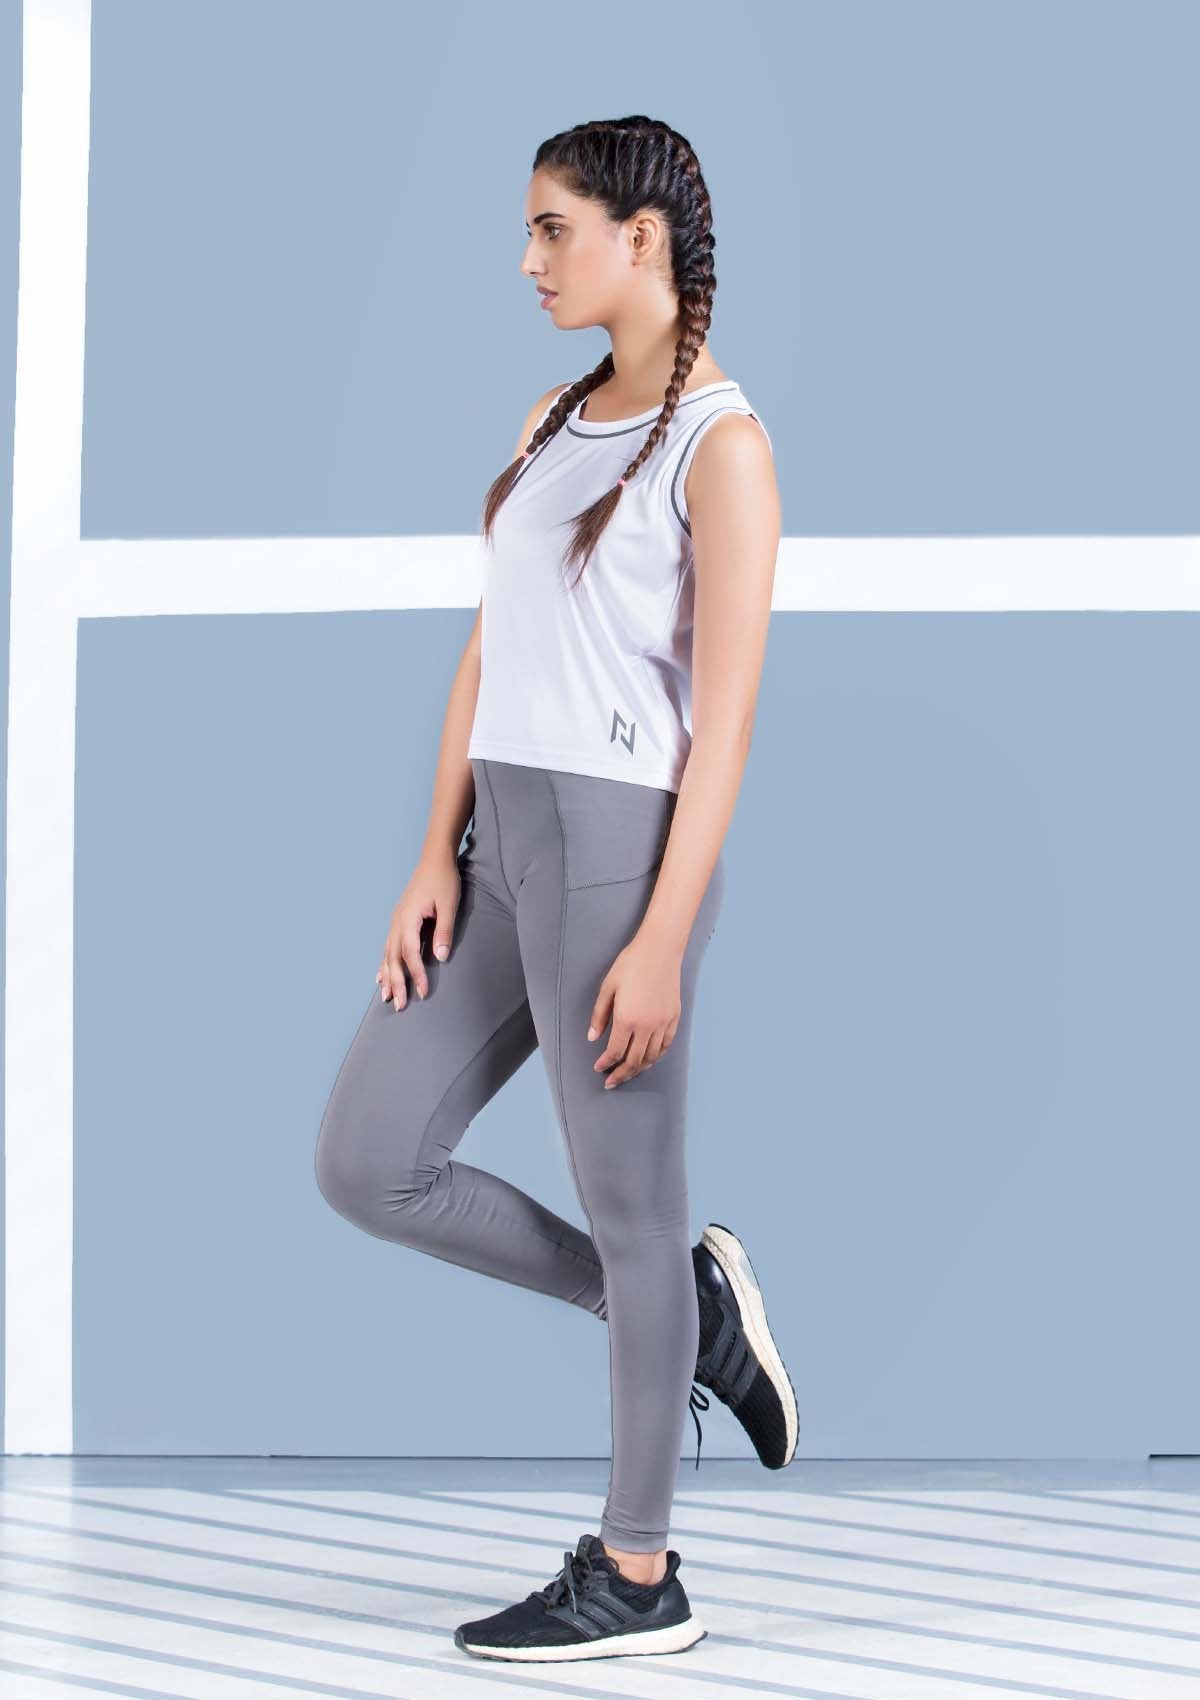 HIGH WAISTED LEGGINGS - GRAPHITE - Nomad Apparel